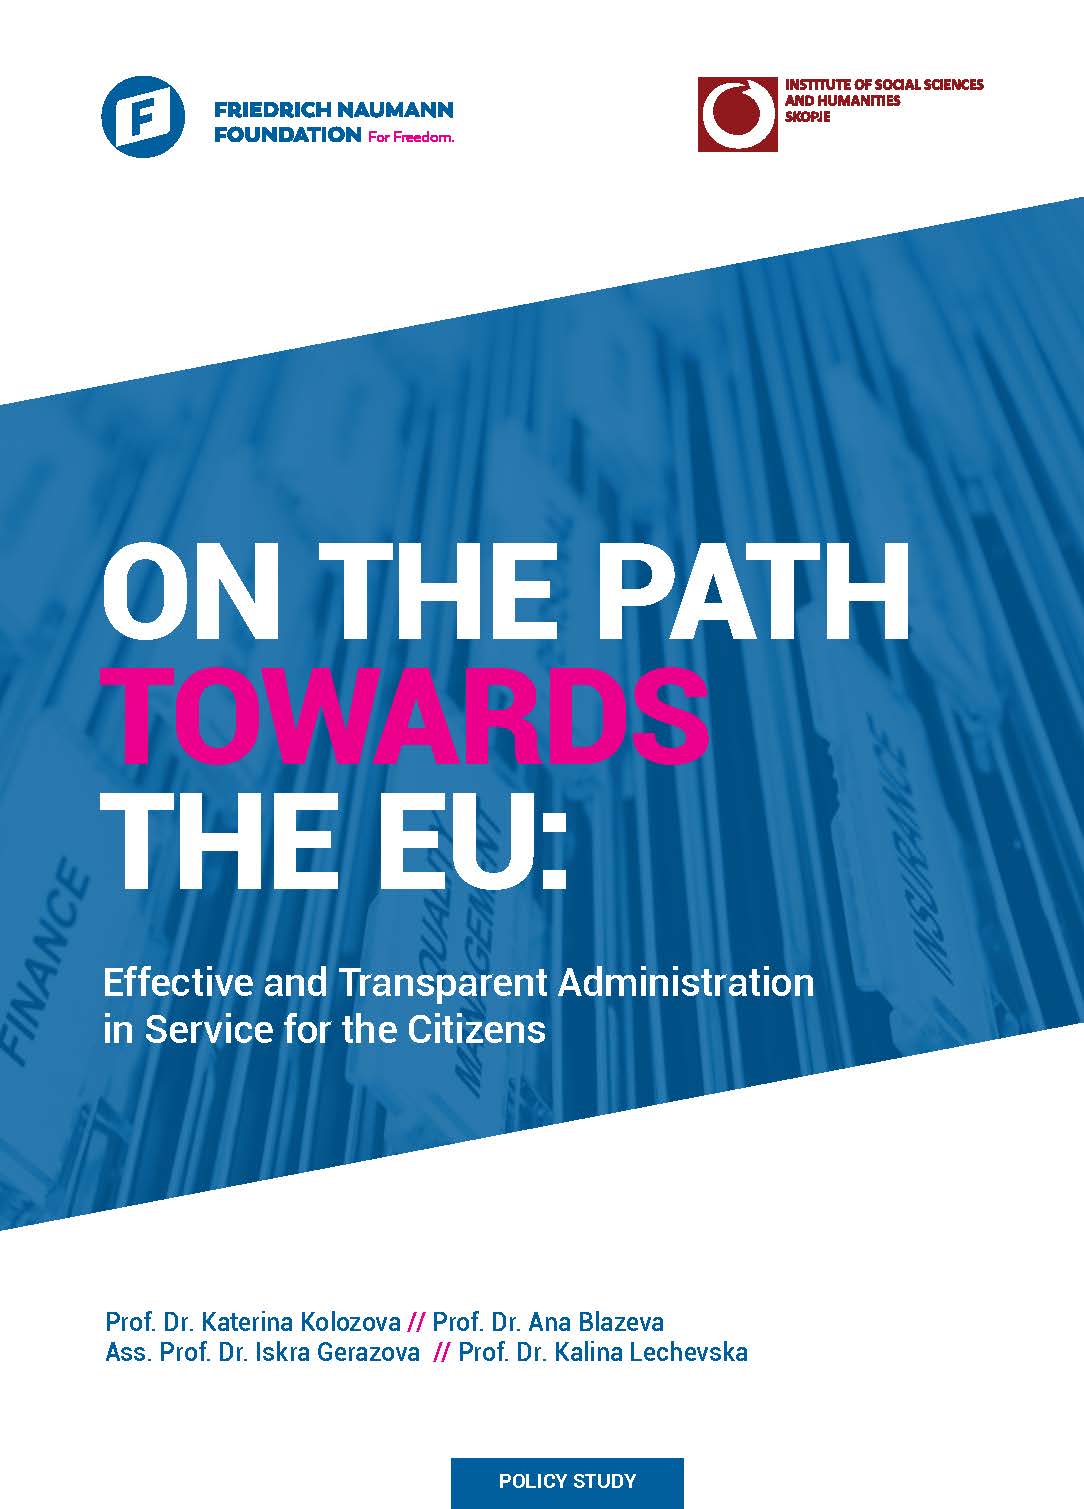 ON THE PATH TOWARDS THE EU Effective and Transparent Administration in Service for the Citizens